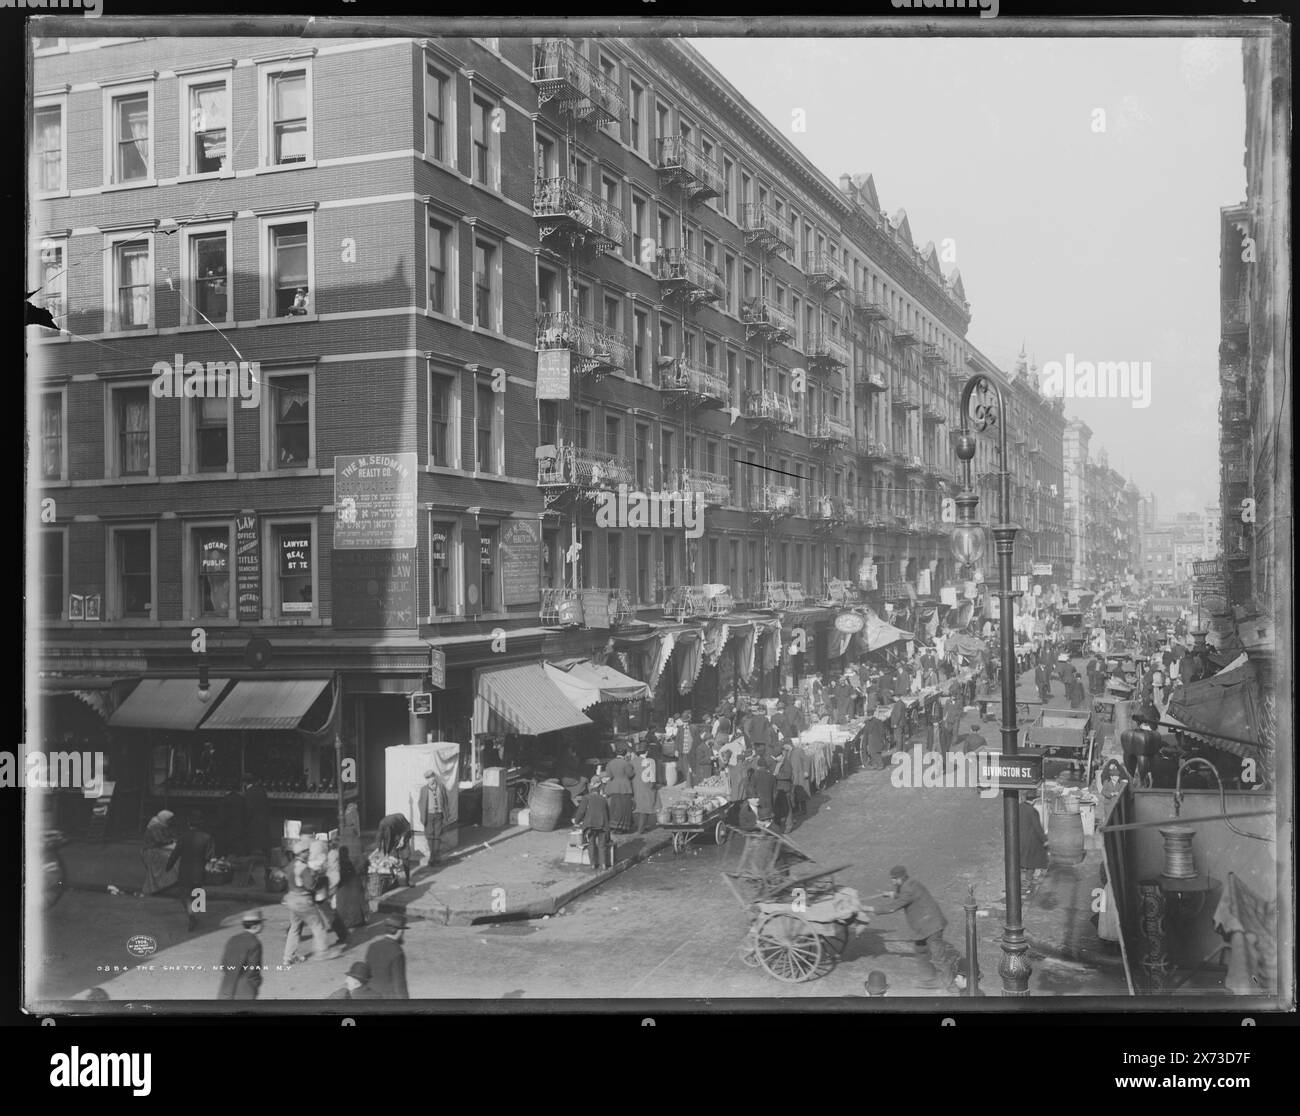 The Ghetto, New York, N.Y., negativo rotto in centro e in cima., 'Rivington Street' sul cartello., Detroit Publishing Co. N. 0884., Lower East Side, New York., Gift; State Historical Society of Colorado; 1949, Slums. , Strade. , Mercati. , Stati Uniti, New York (Stato), New York. Foto Stock